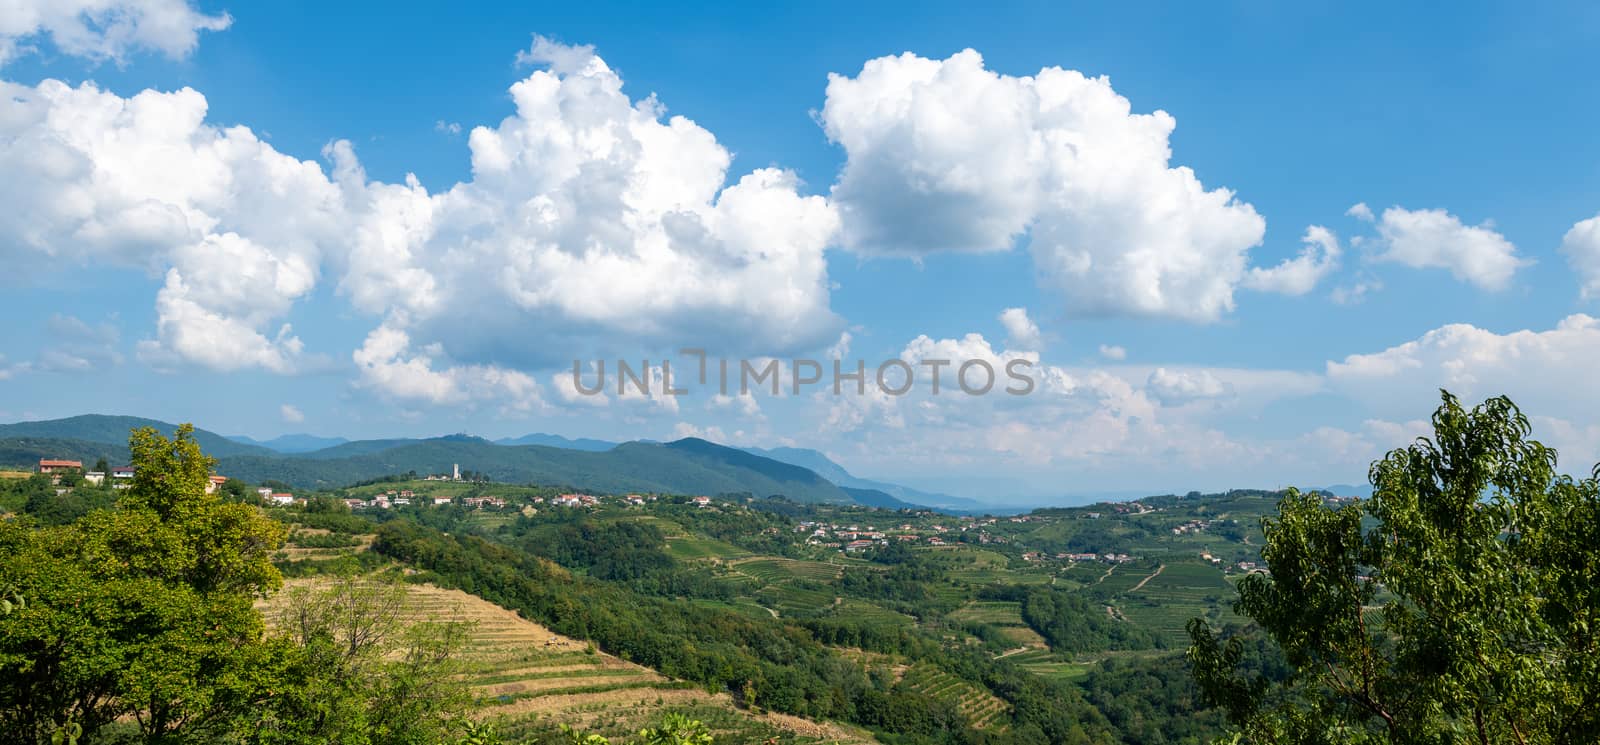 Village of Kojsko, Sloveniain famous wine growing region of Goriska Brda, with vineyards and orchards, lit by sun and clouds in background, holy mountain with church above Nova Gorica in background